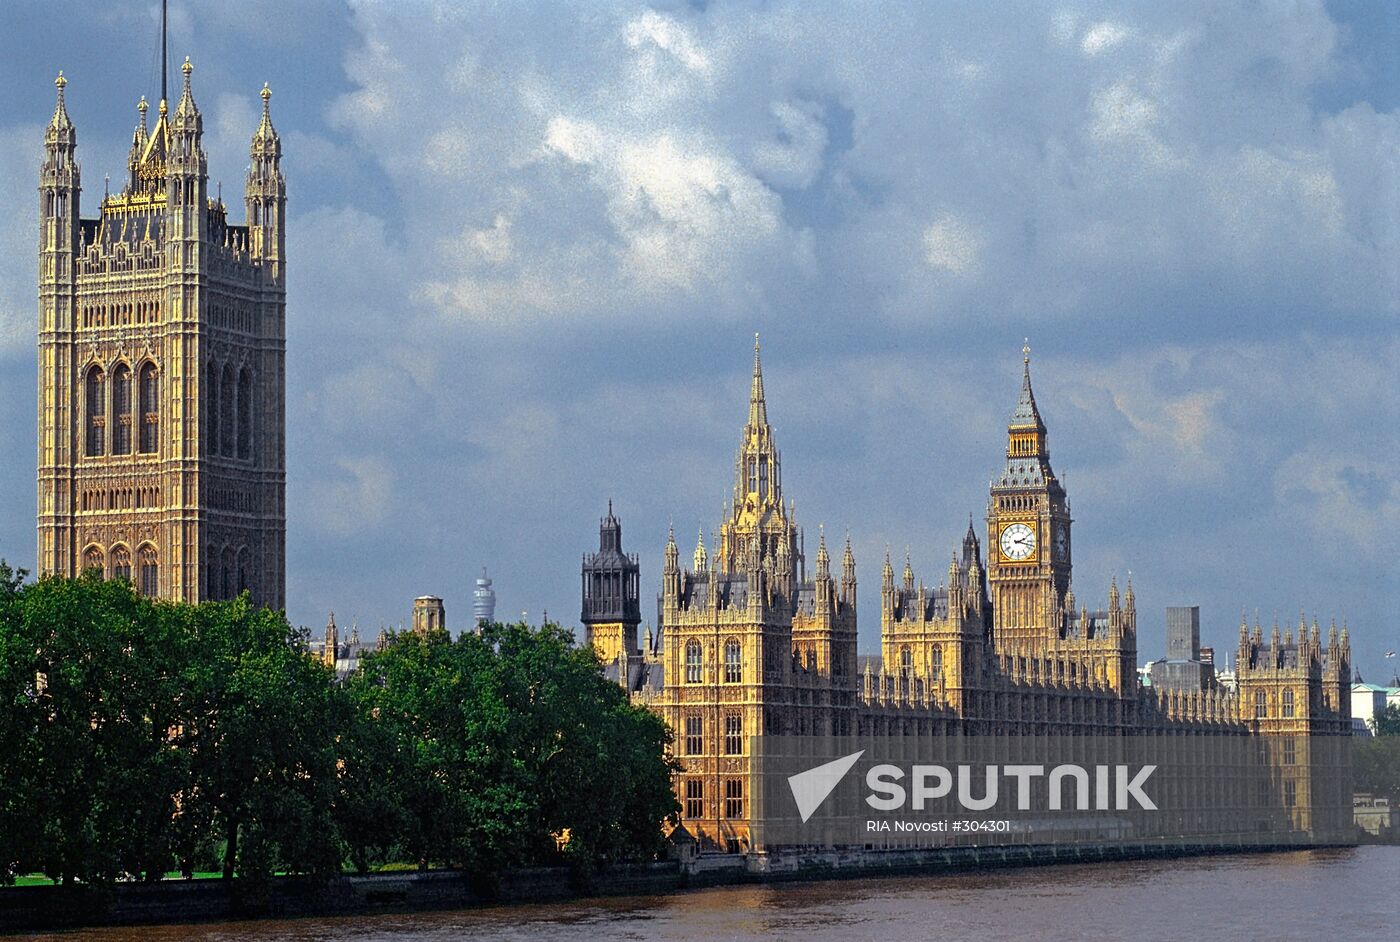 The Westminster Palace in London, the United Kingdom